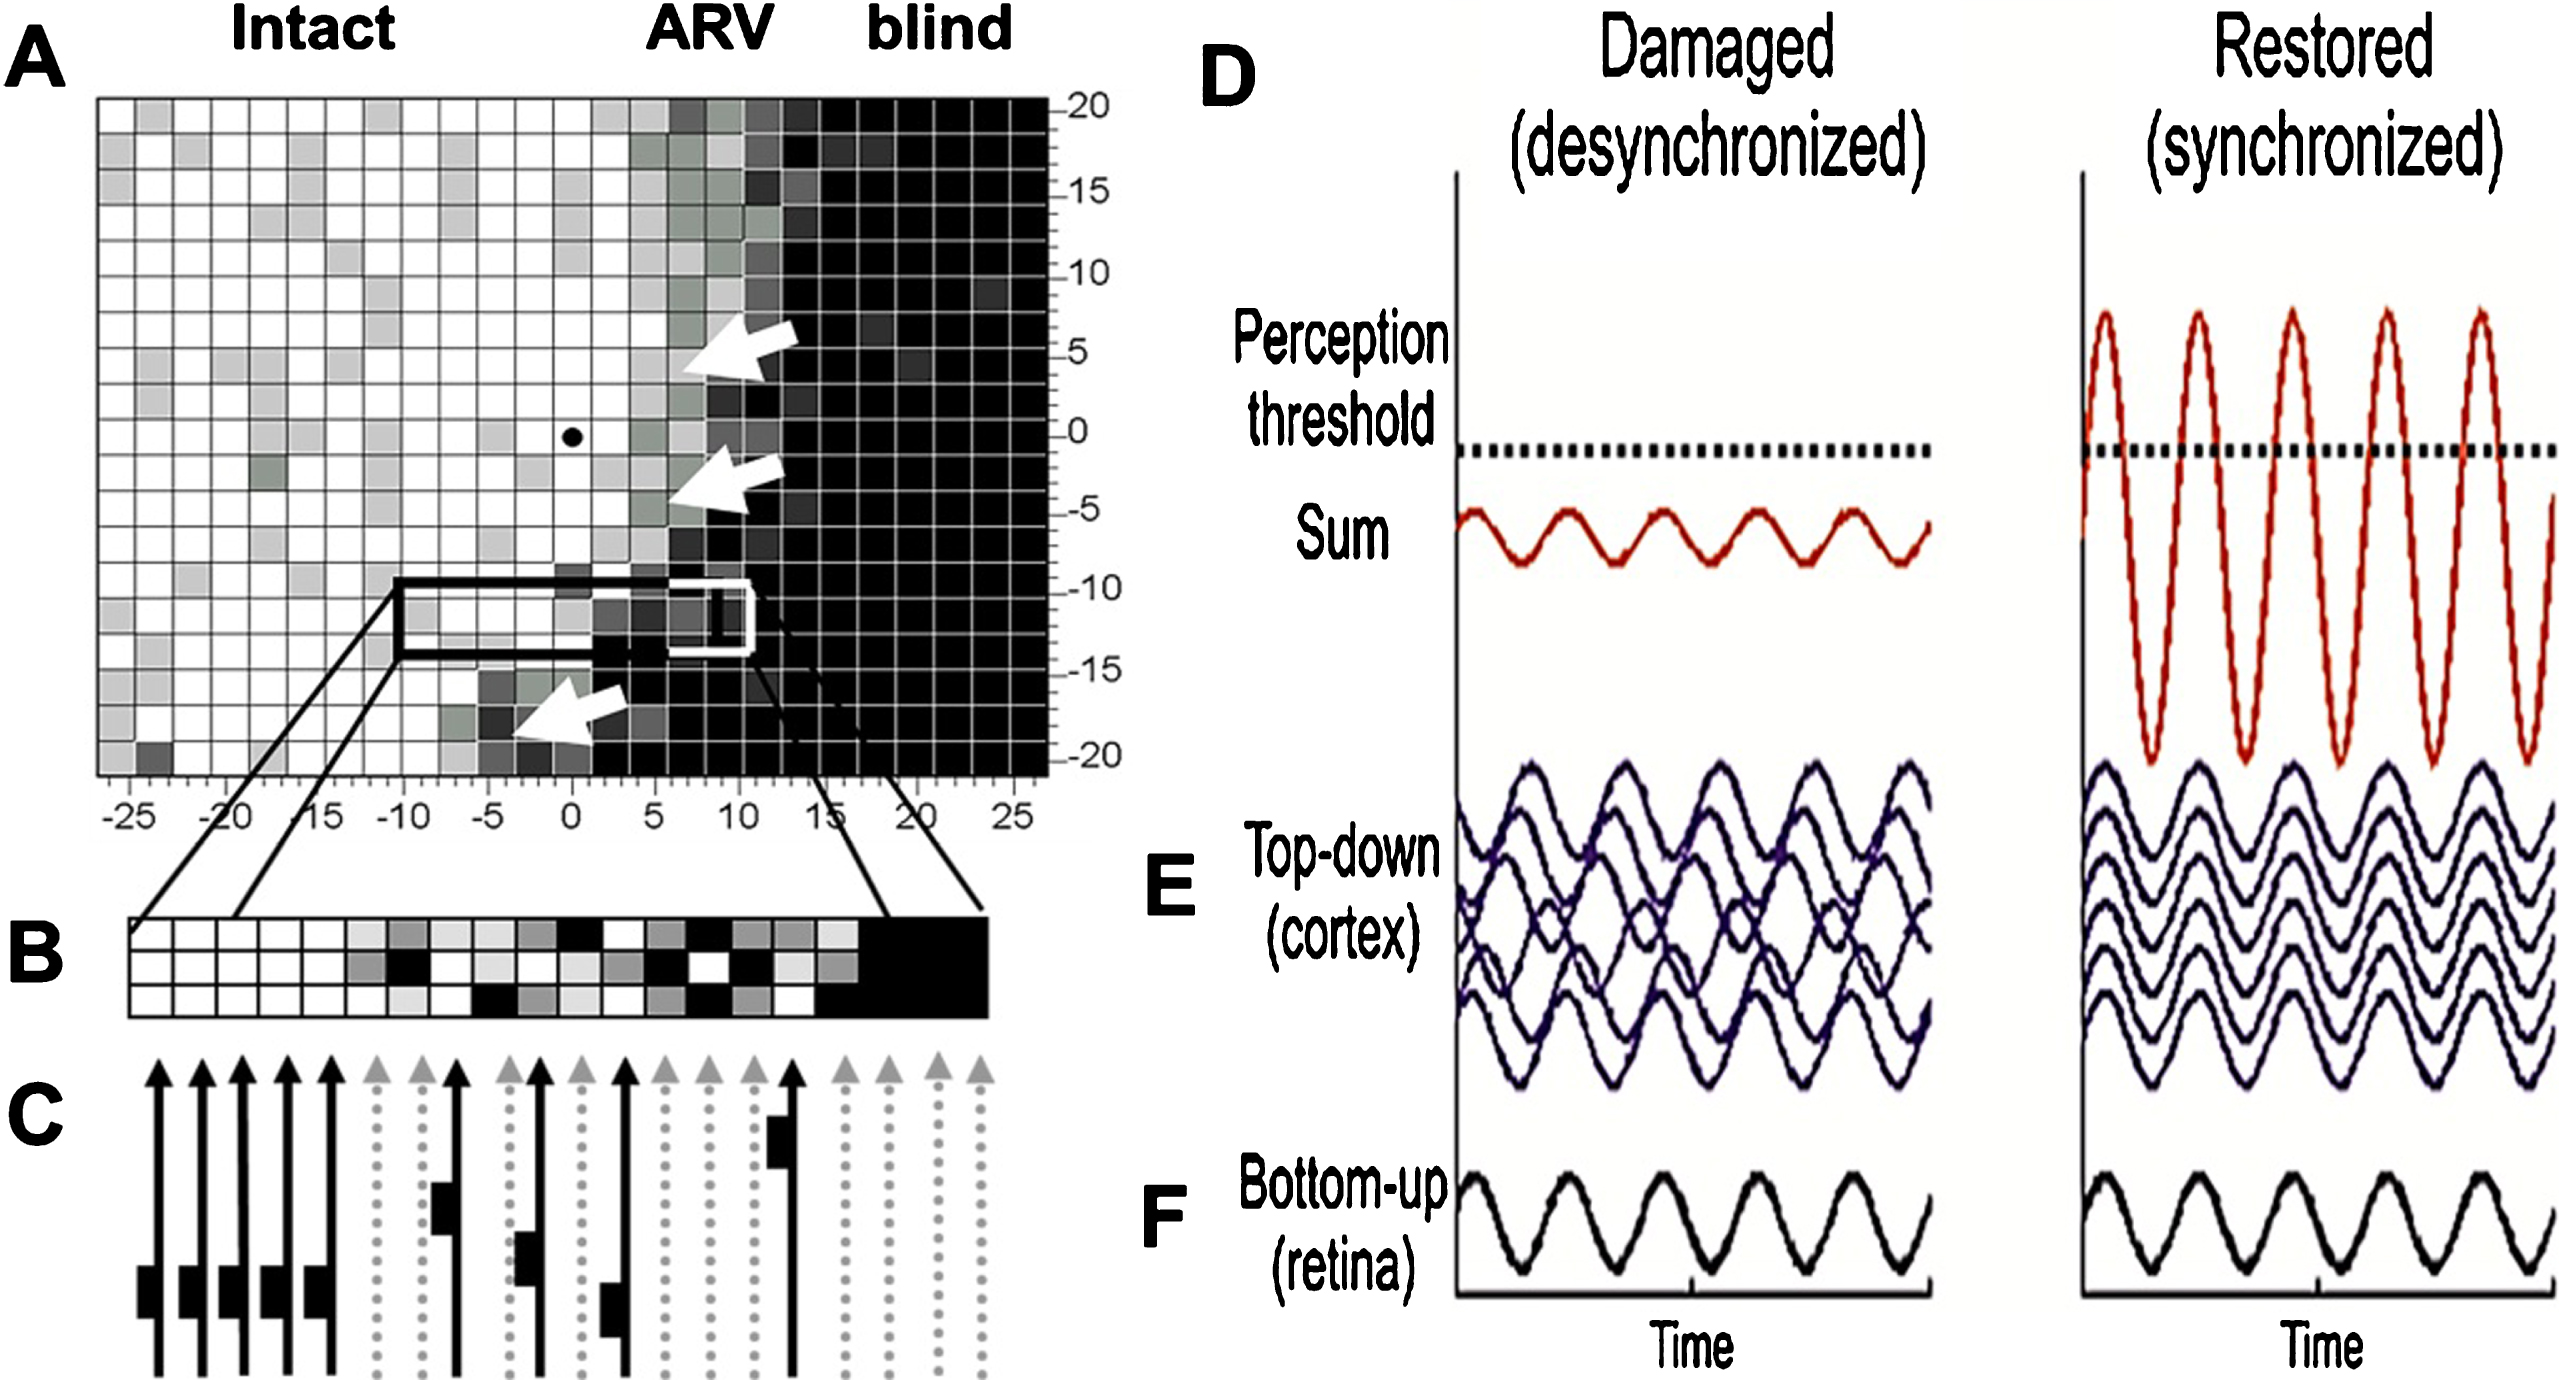 Residual vision and brain network amplification. (A) This graph serves only as a conceptual guide to appreciate the nature of residual vision and the interactions of retina and brain by neuronal oscillatory activity. Accordingly, vision loss (e.g. measured by detection ability) depends on how many cells are lost: the greater the cell loss, the greater is the defect in different regions of the visual field. Areas of residual vision (ARVs; shown in grey) correspond to regions of partial damage with or without vascular dysregulation. They are found in all kinds of visual field defects such as after stroke (e.g. hemianopia) or retinal or optic nerve damage (e.g. glaucoma). Black areas represent complete damage. Note, however, that many black regions may, in fact, have some residual visual function as well. (B) Whether or not visual stimuli processes by the retina are consciously perceived by the brains is not only determined by the strength of the neuronal signals sent by the retina to the brain, but it also depends on how the brain processes this information through synchronization, amplification and interpretation. Neural activity of the retina is represented here by a simple sine wave. If the brain network is disorganized (illustrated here by non-synchronized, out-of-phase brain sine waves), the sum of retinal and brain signals is too low to surpass the perceptual threshold and the visual stimulus is not perceived. When the brain is synchronized, this elevates (amplifies) the same residual visual signal to above-threshold perception, thus improving or restoring conscious vision.